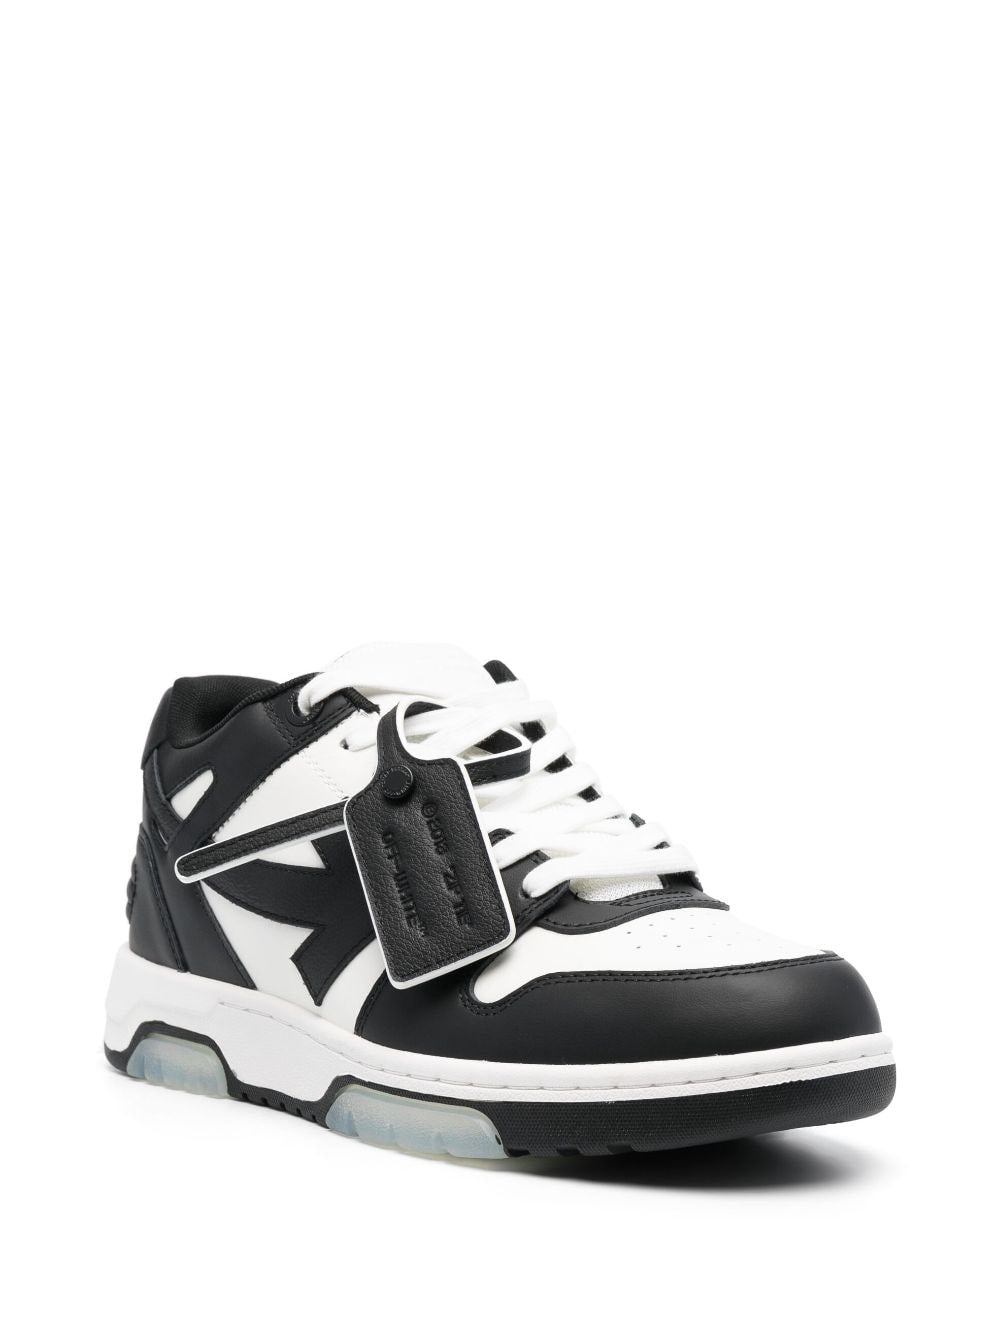 OFF-WHITE Black and White Leather Sneakers with Grey Side Arrow for Men